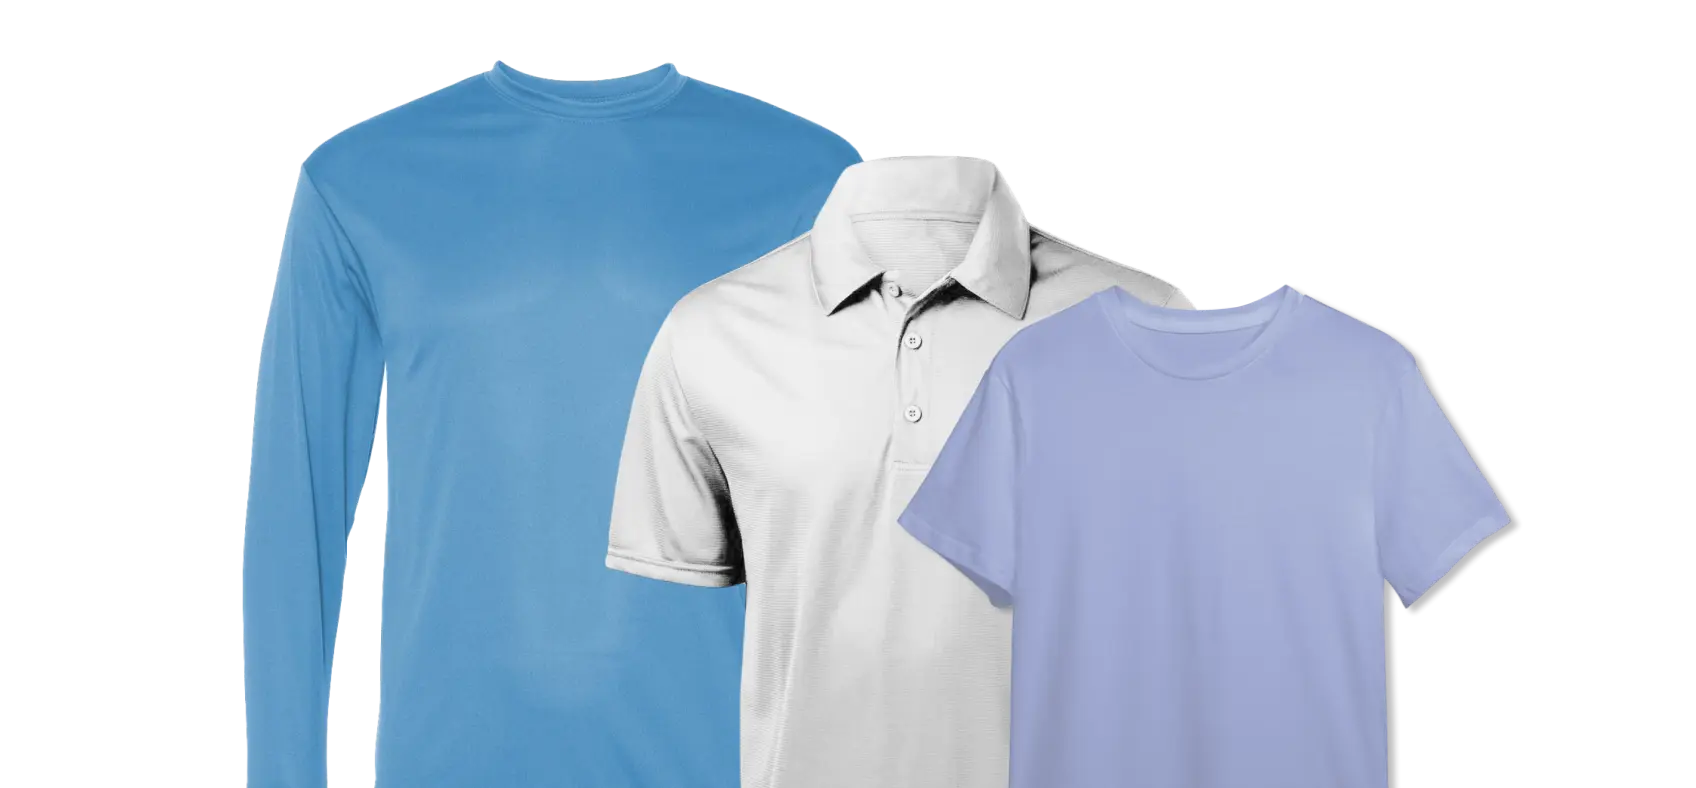 Blue long sleeve, white polo, lilac color t-shirt